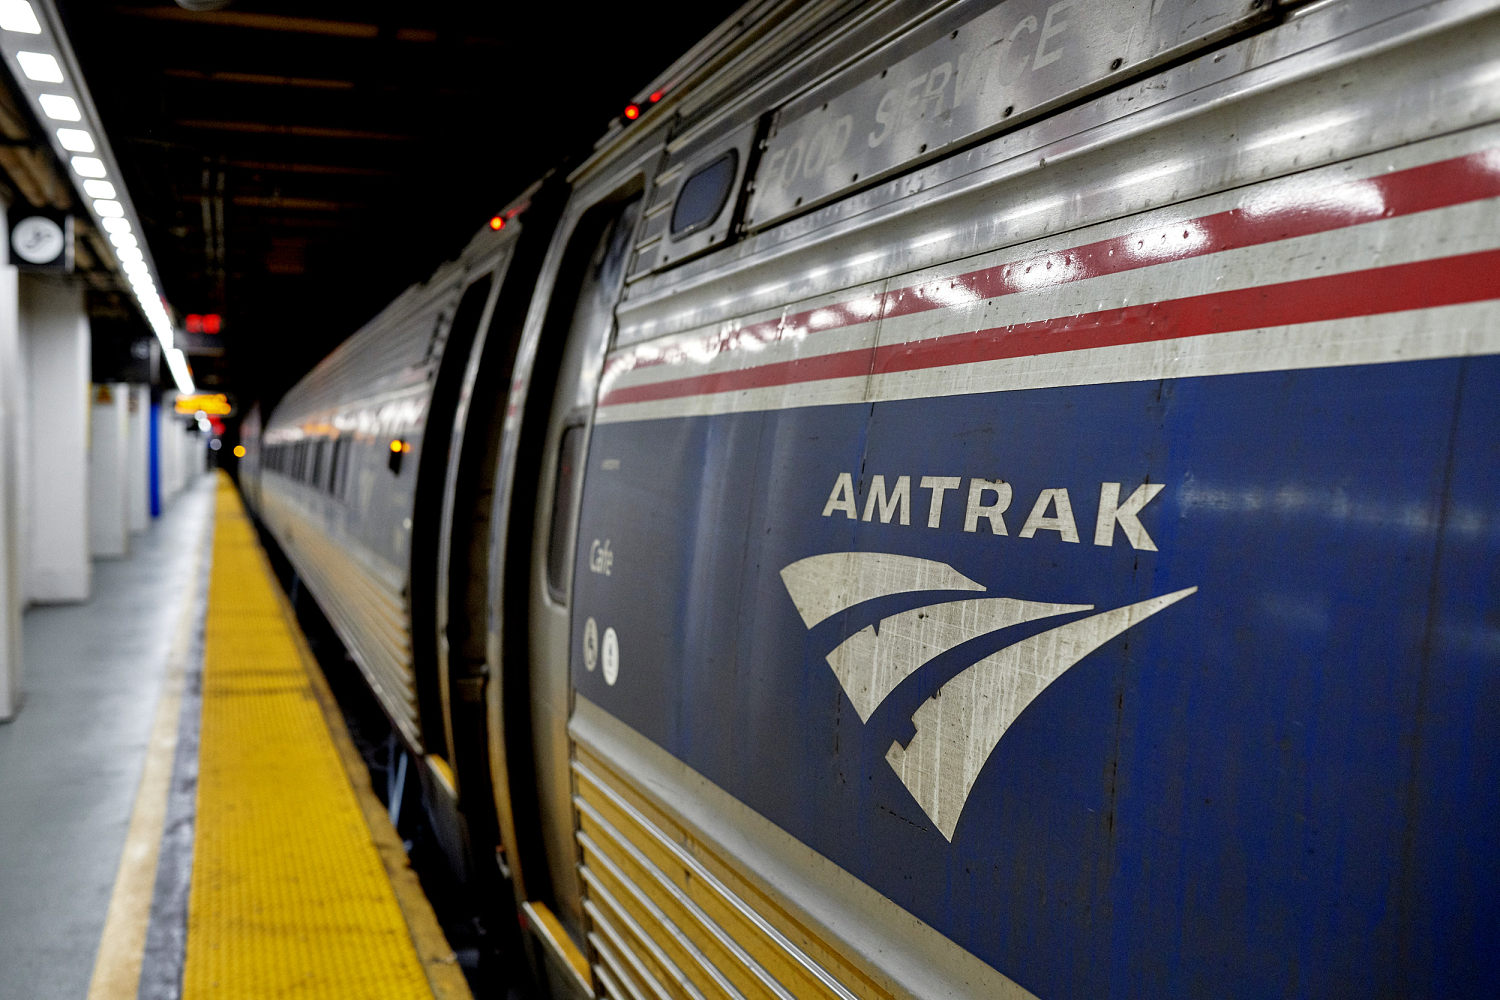 Amtrak service between New York and Boston resumes after suspension